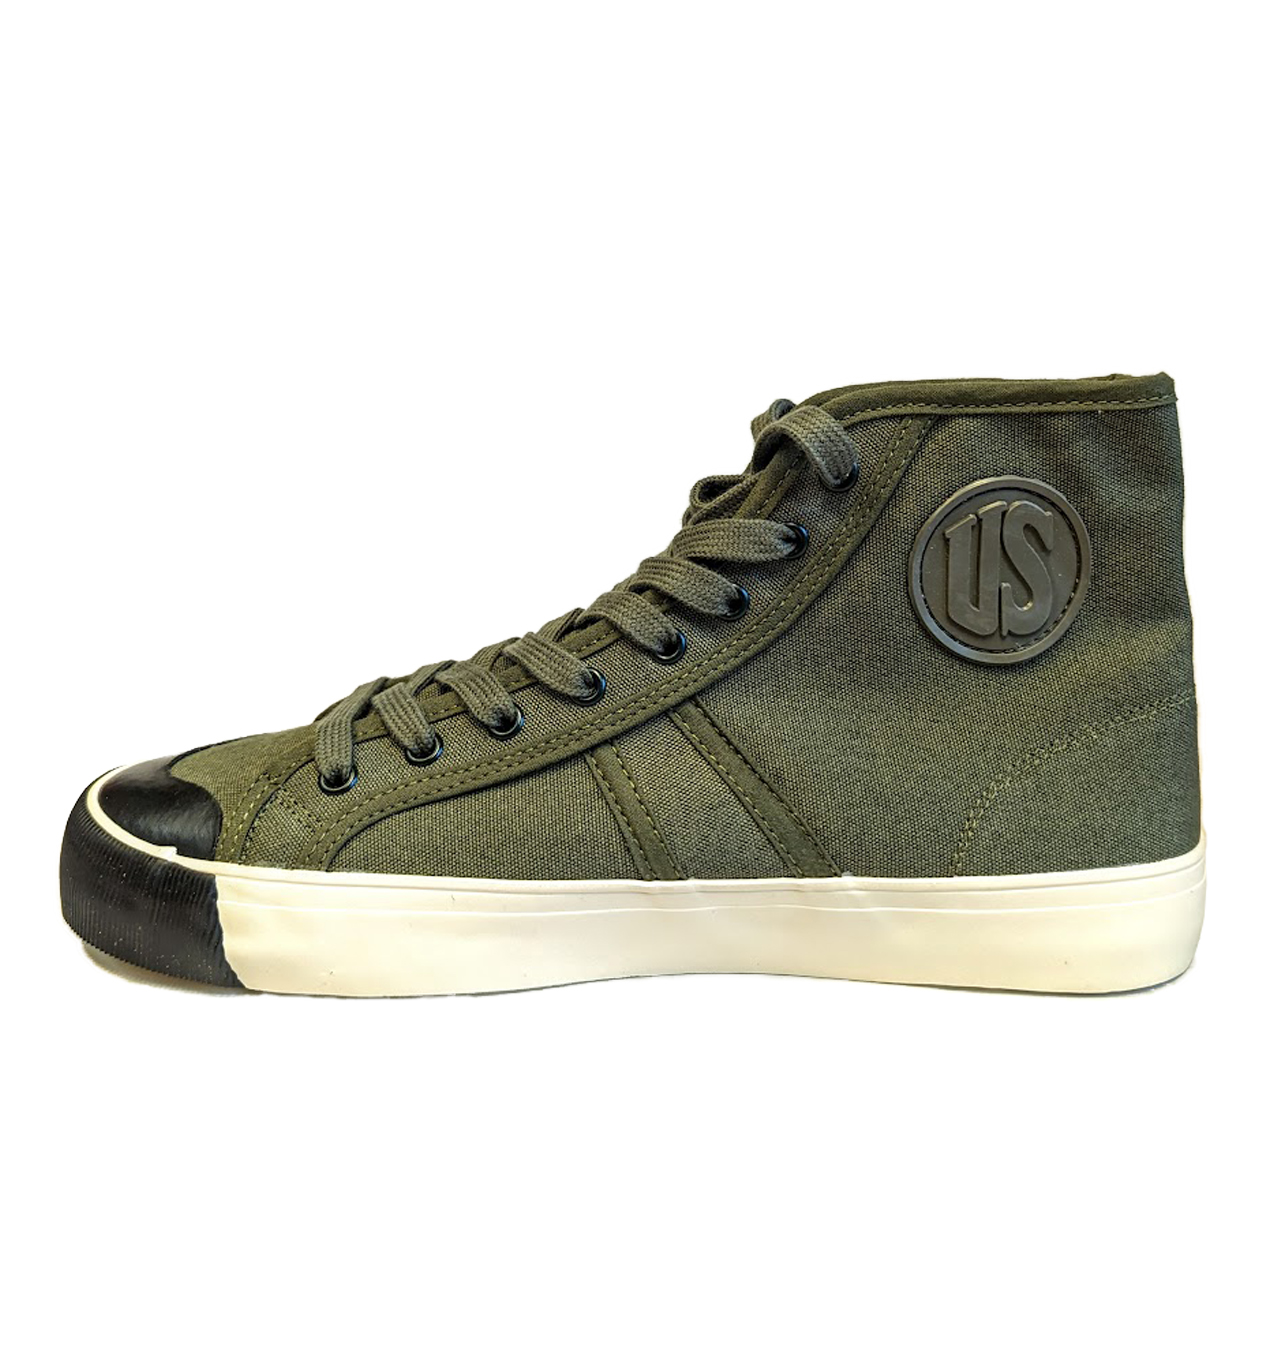 Colchester-By-US-Rubber-Co---High-Top-Canvas-Sneaker---Military-Green1